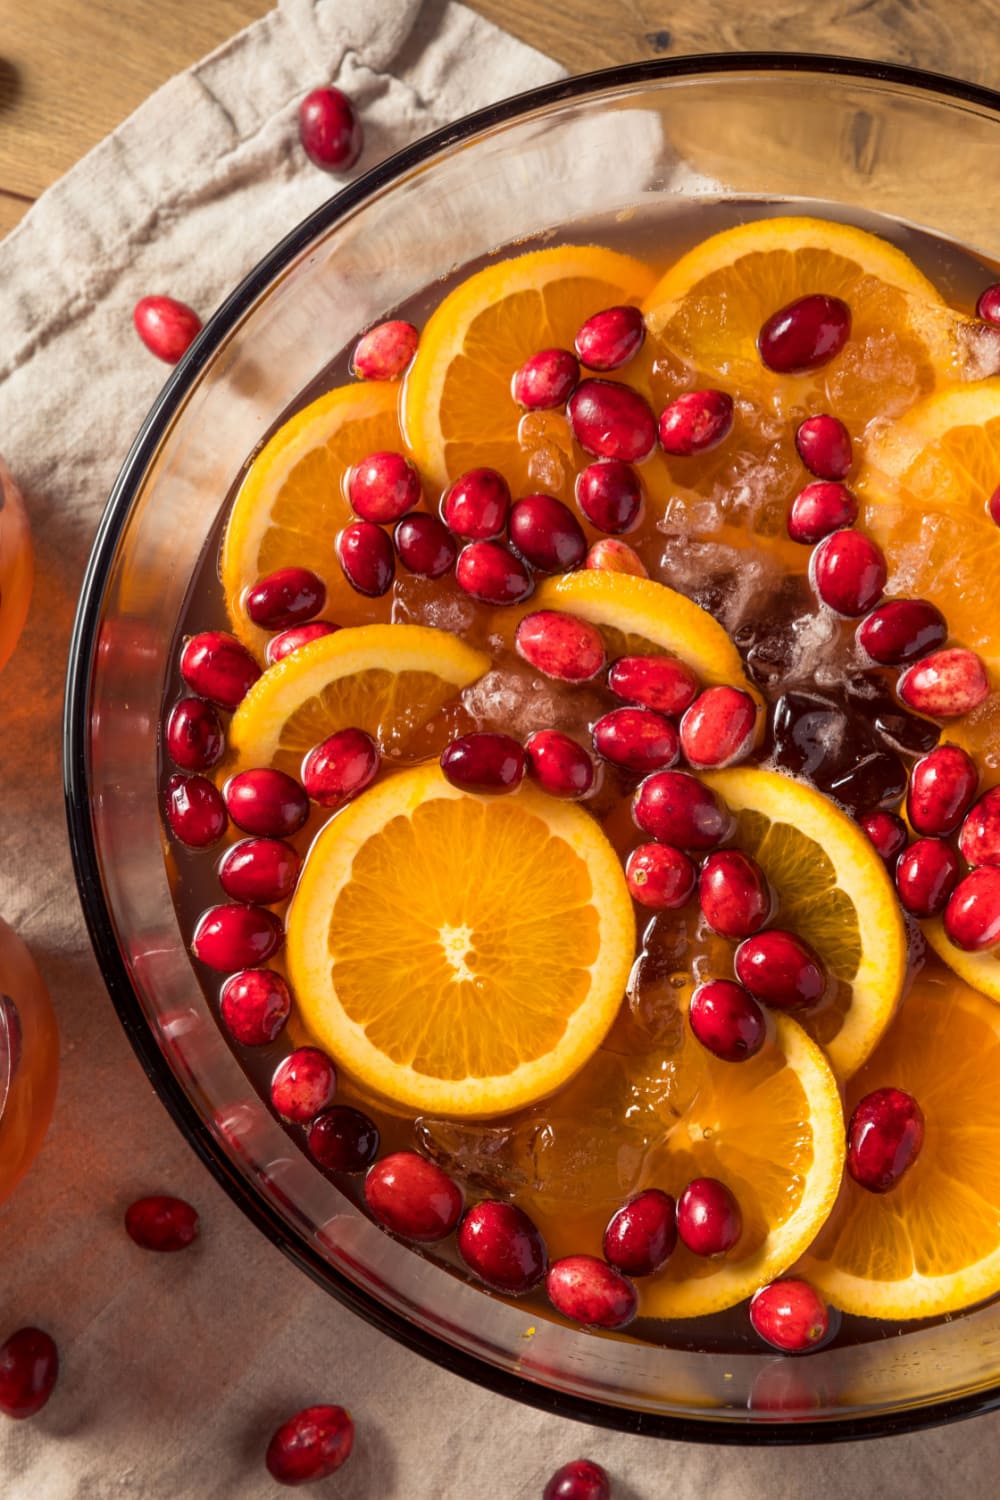 Homemade Refreshing Christmas Punch with Cranberries and Oranges